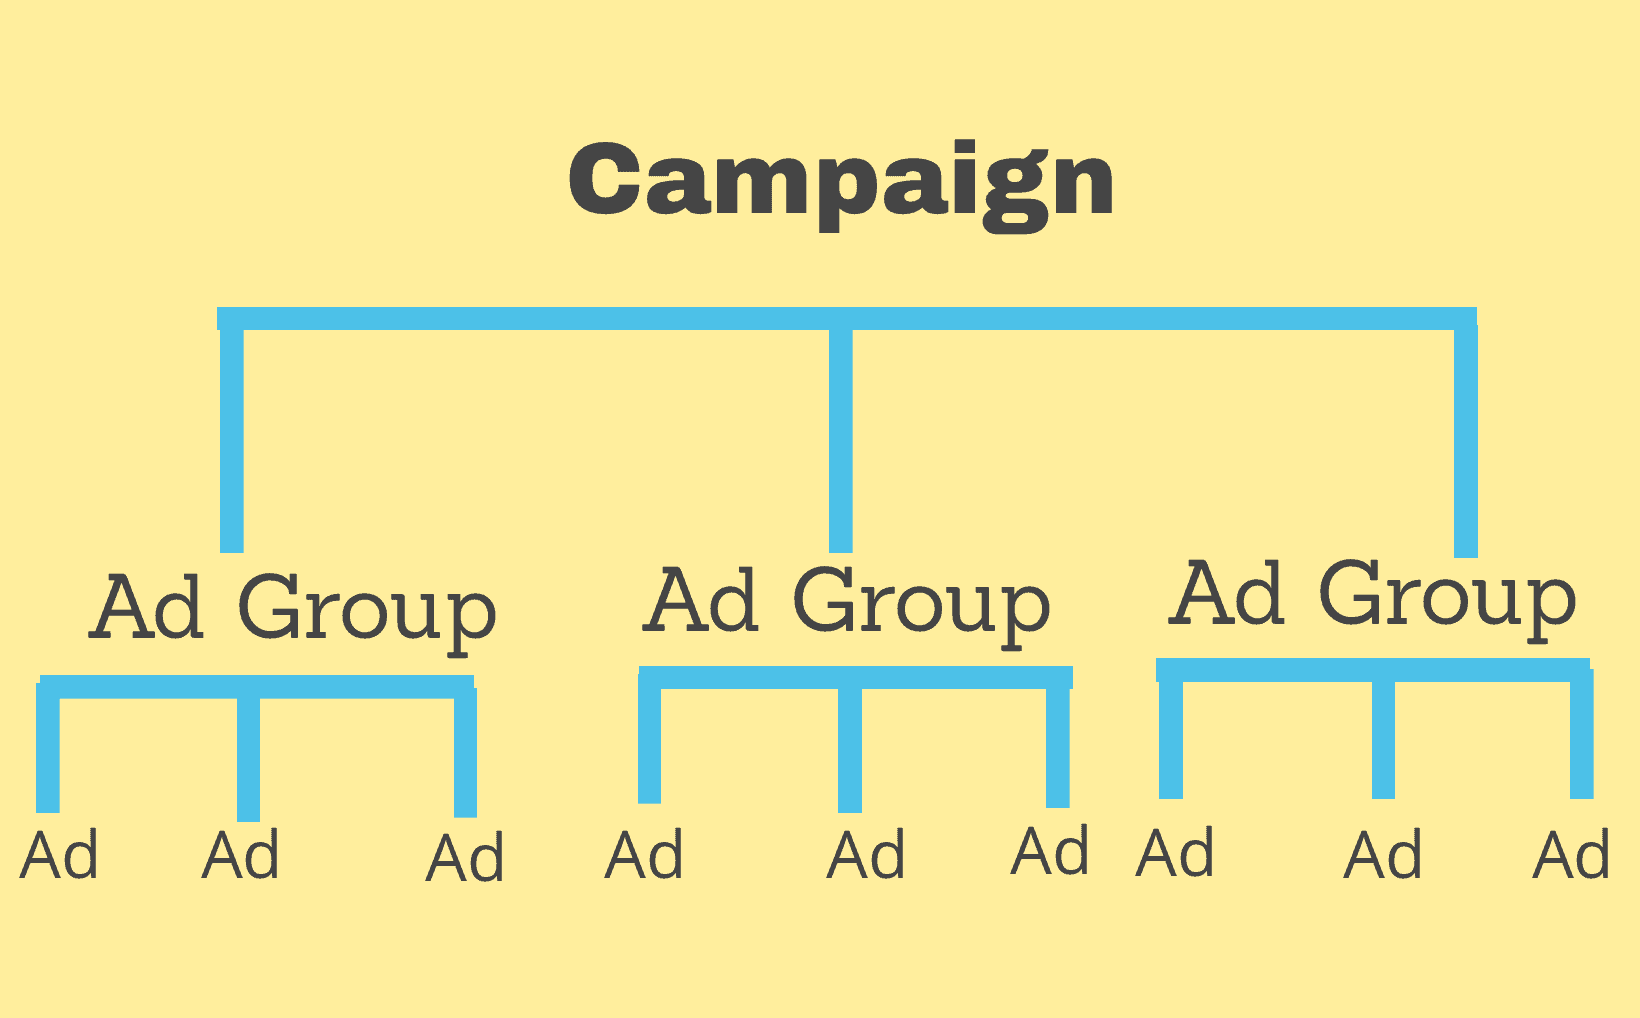 A Presentation of how Campaign Flows